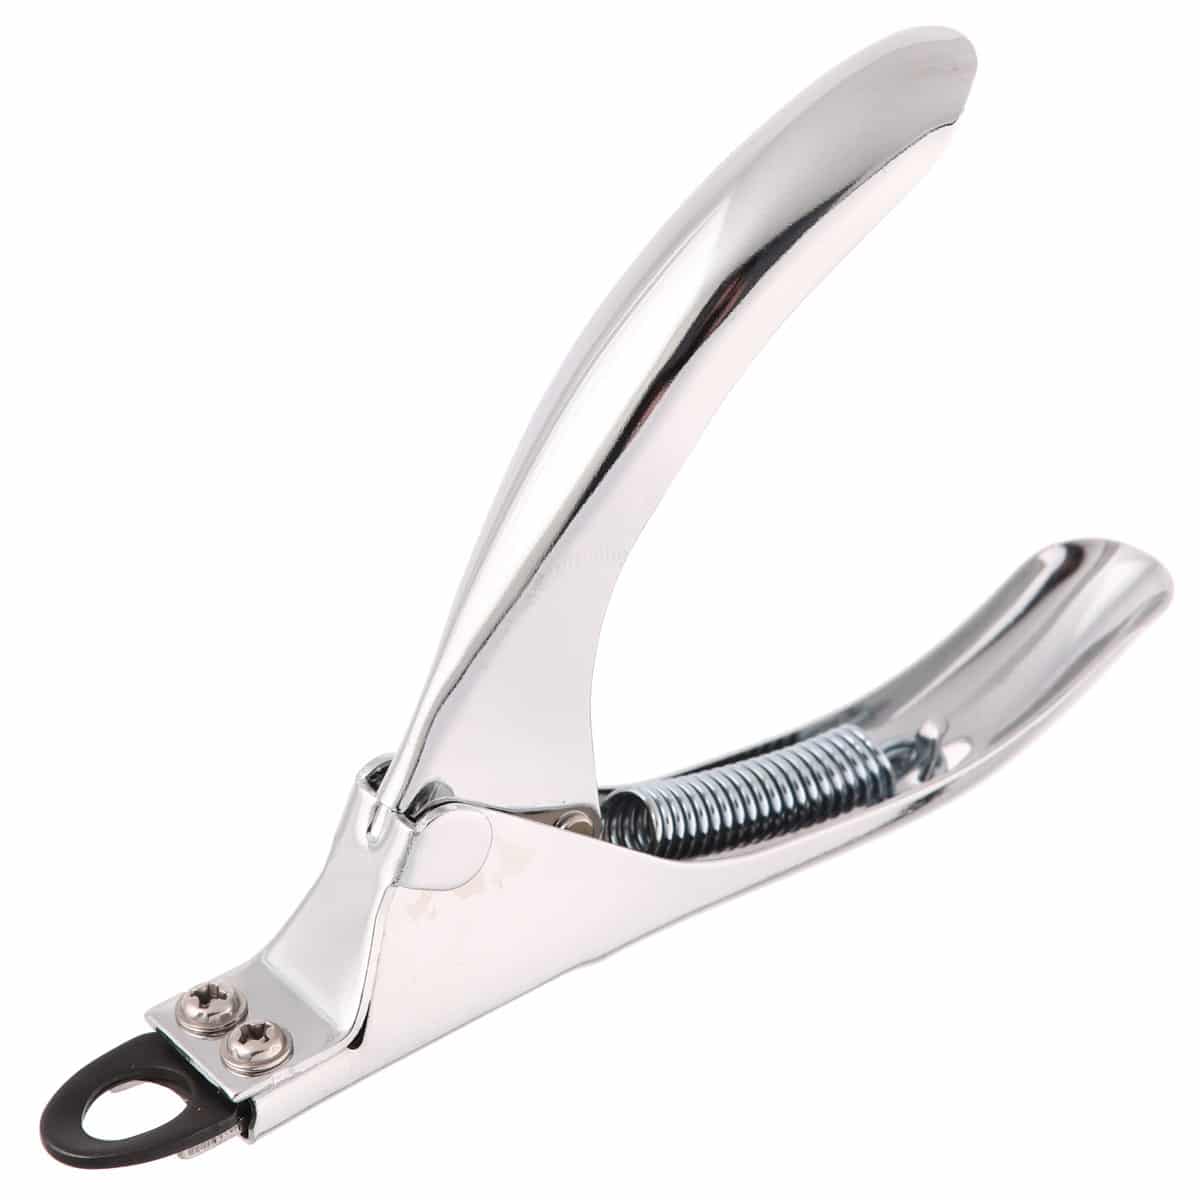 Guillotine Nail Clipper by Groom Professional